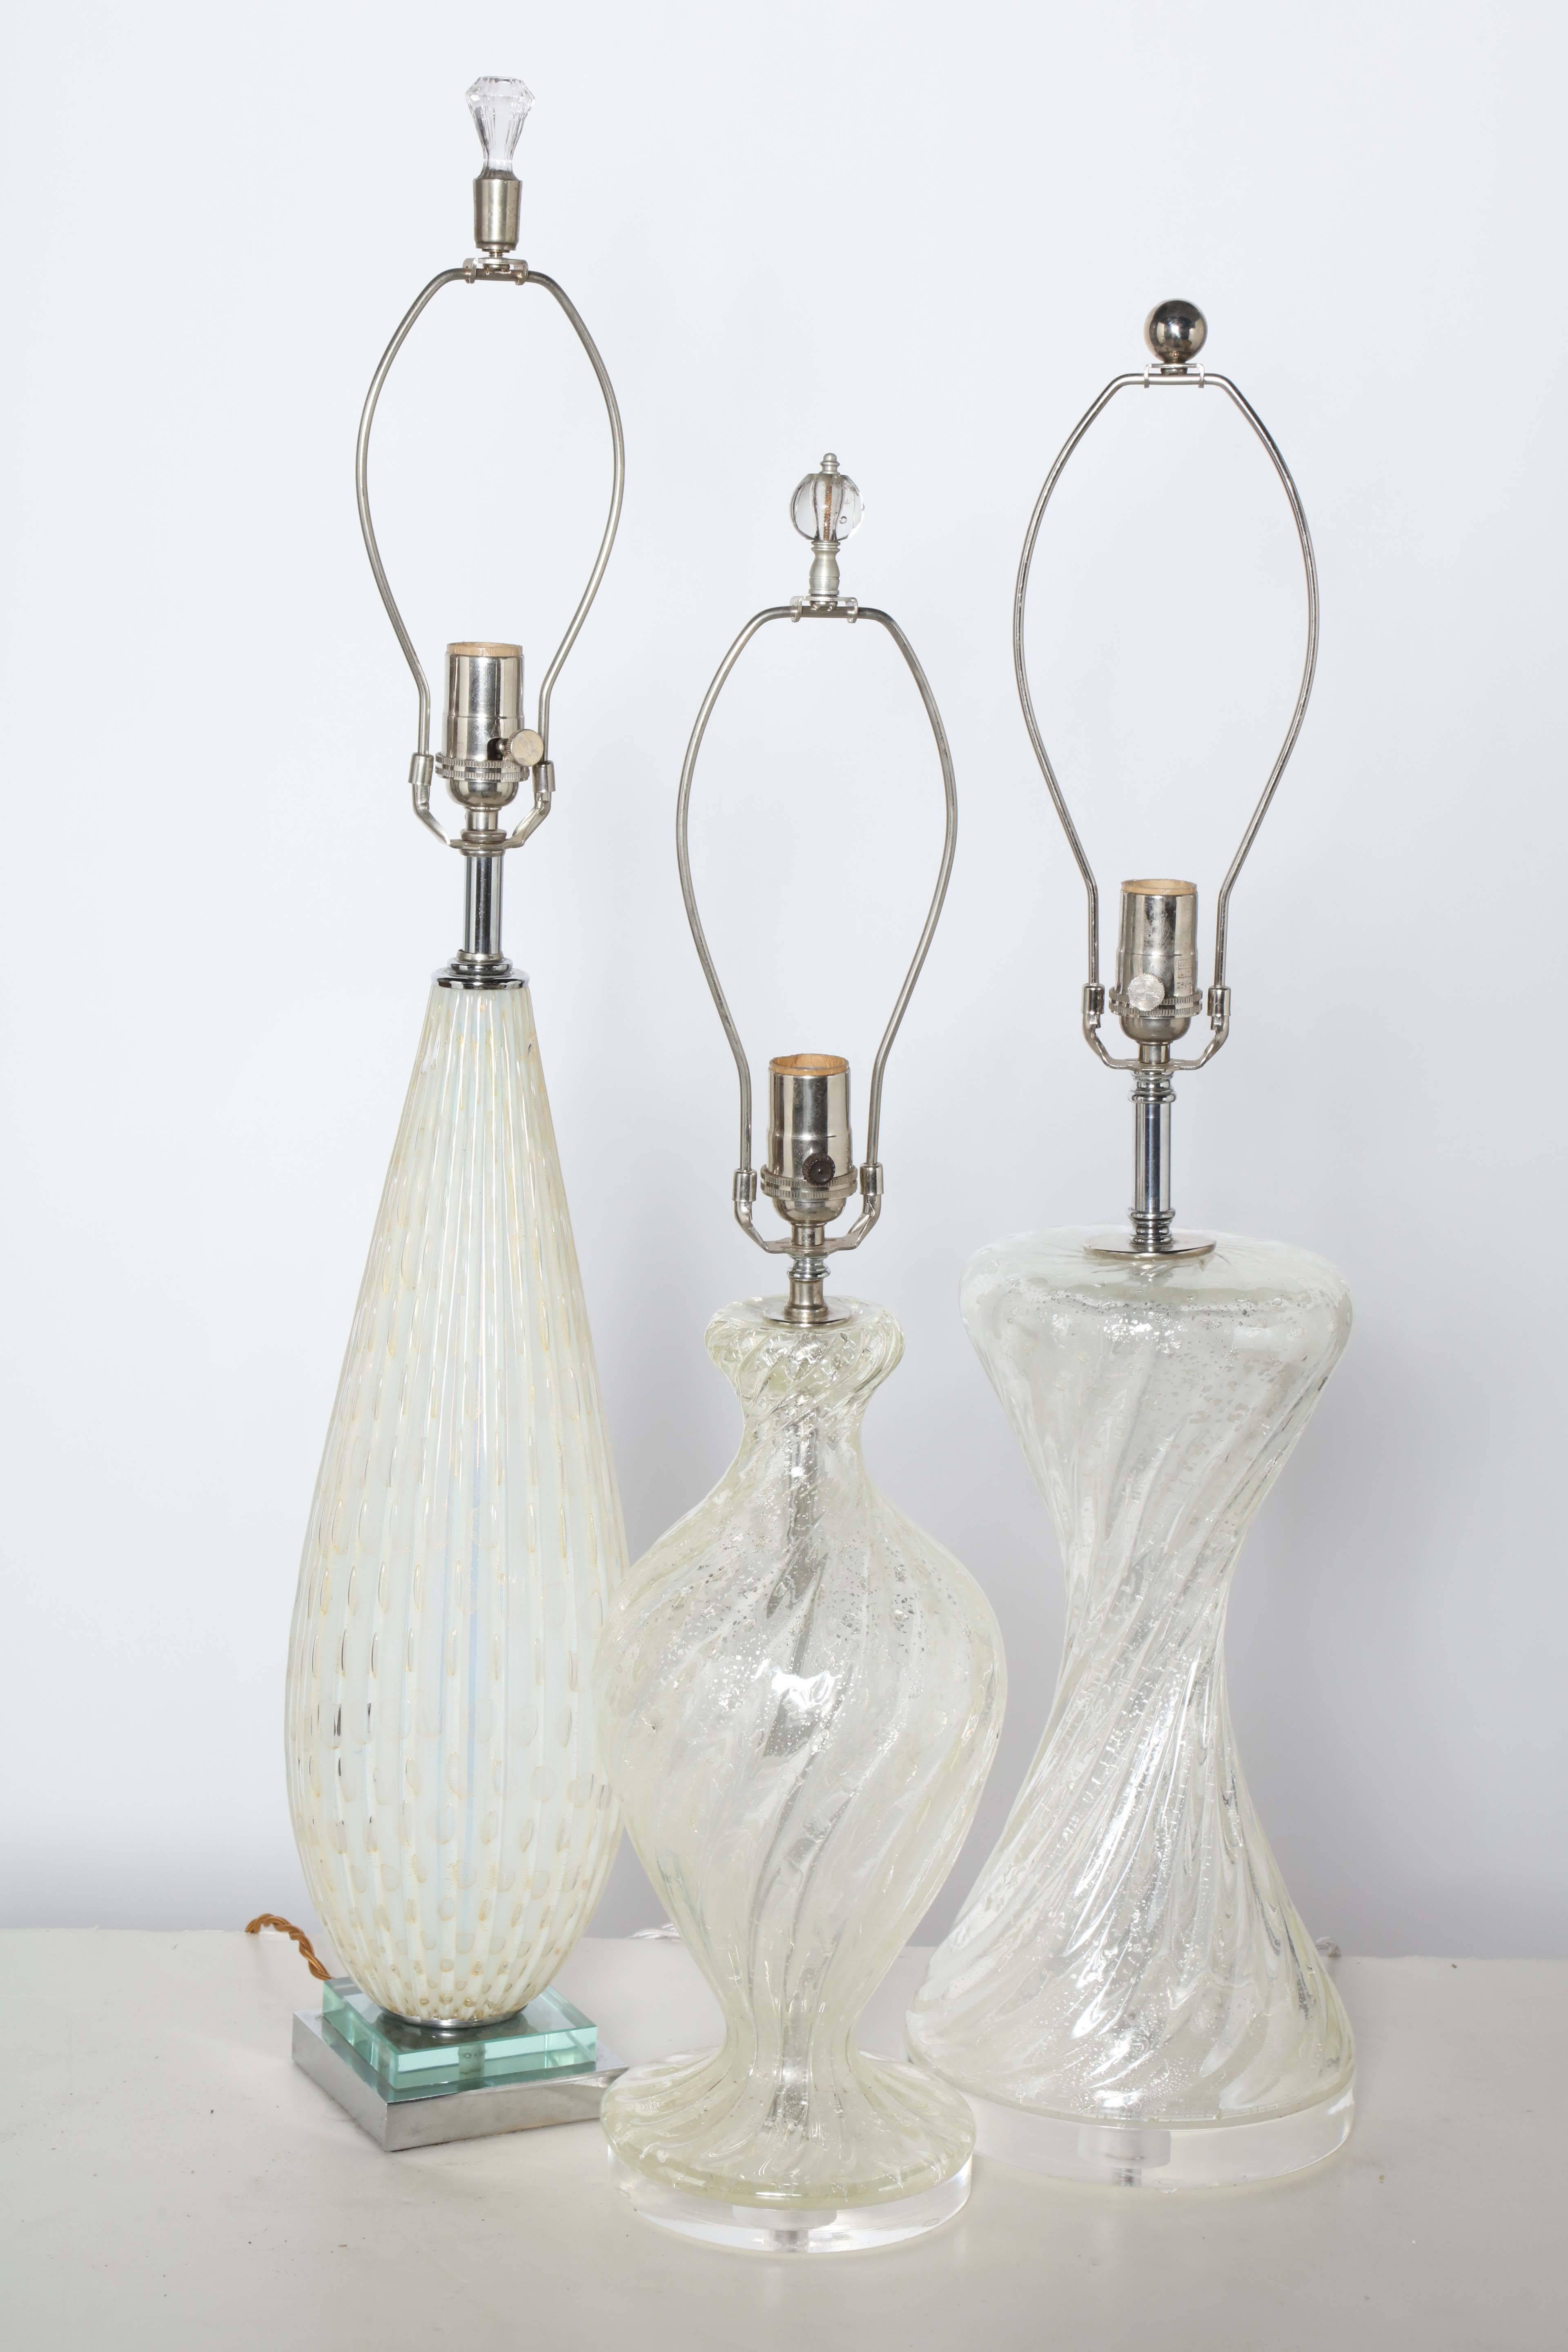 Variety of Three Italian Modern Murano Glass Translucent Table Lamps. Rewired since photography with nickel-plated hardware. Made in Italy. Priced separately. 
Left: Ribbed tear drop form with Pale Yellow oval details. On a stacked Glass and Chrome